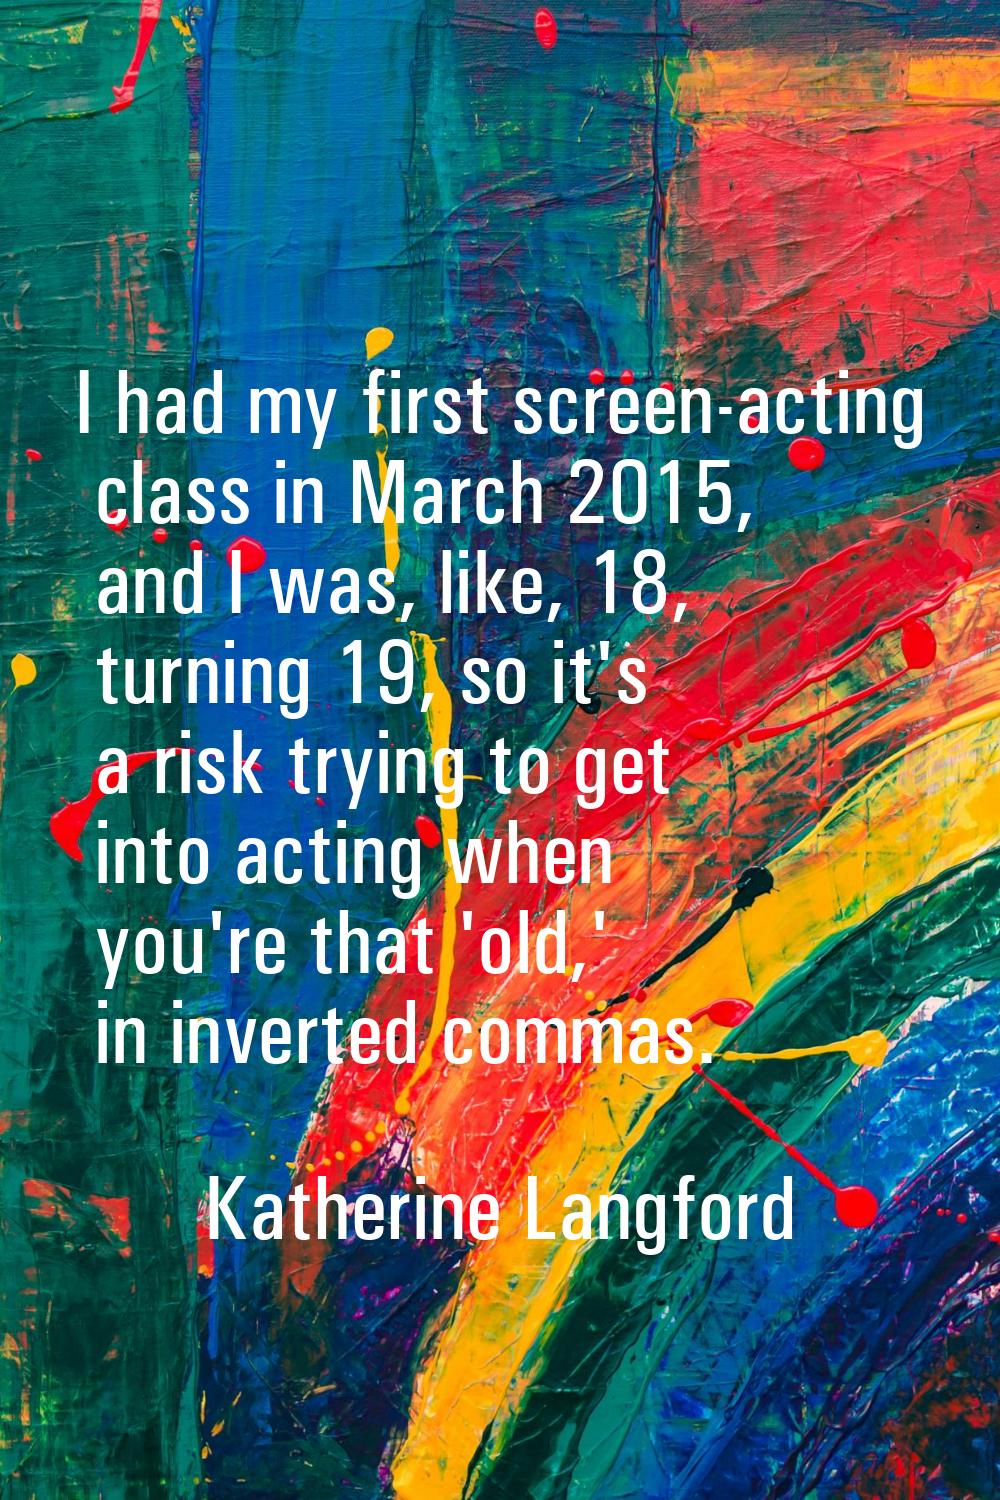 I had my first screen-acting class in March 2015, and I was, like, 18, turning 19, so it's a risk t